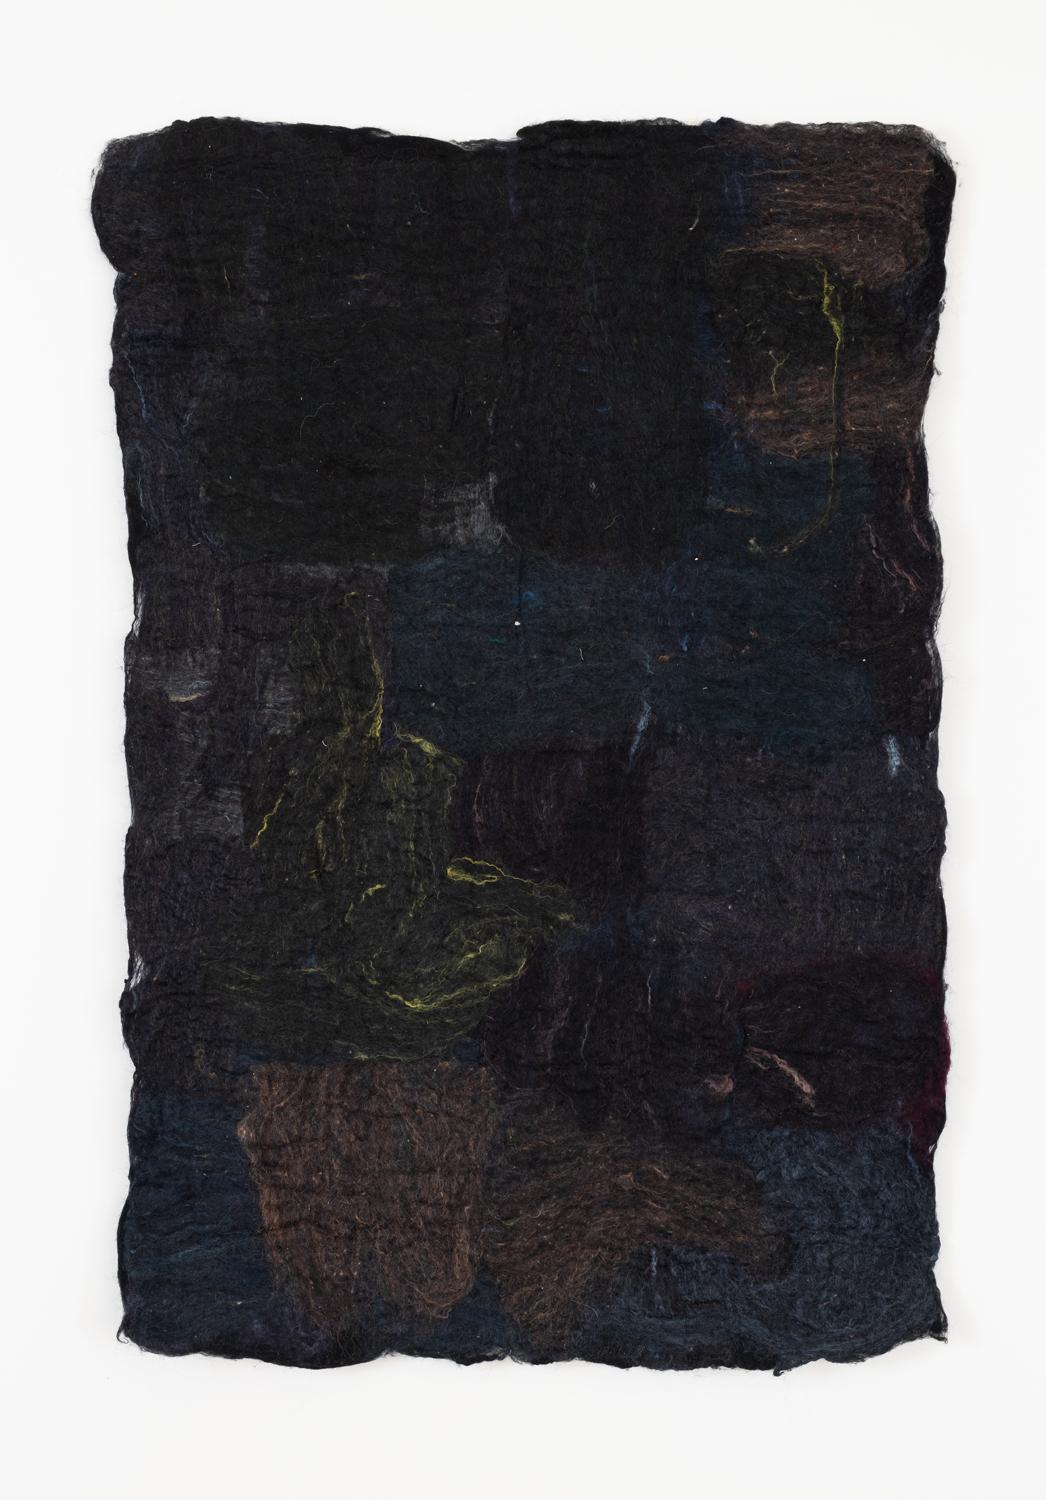 Long Chrichel House Burgundian Black Series no. 5 Tapestry by Claudy
Jongstra
Dimensions: W 105 x H 170 cm. 
Materials: Drenth Heath and Merino Wool, Mohair, Silk.

Claudy Jongstra is known worldwide for her monumental artworks and